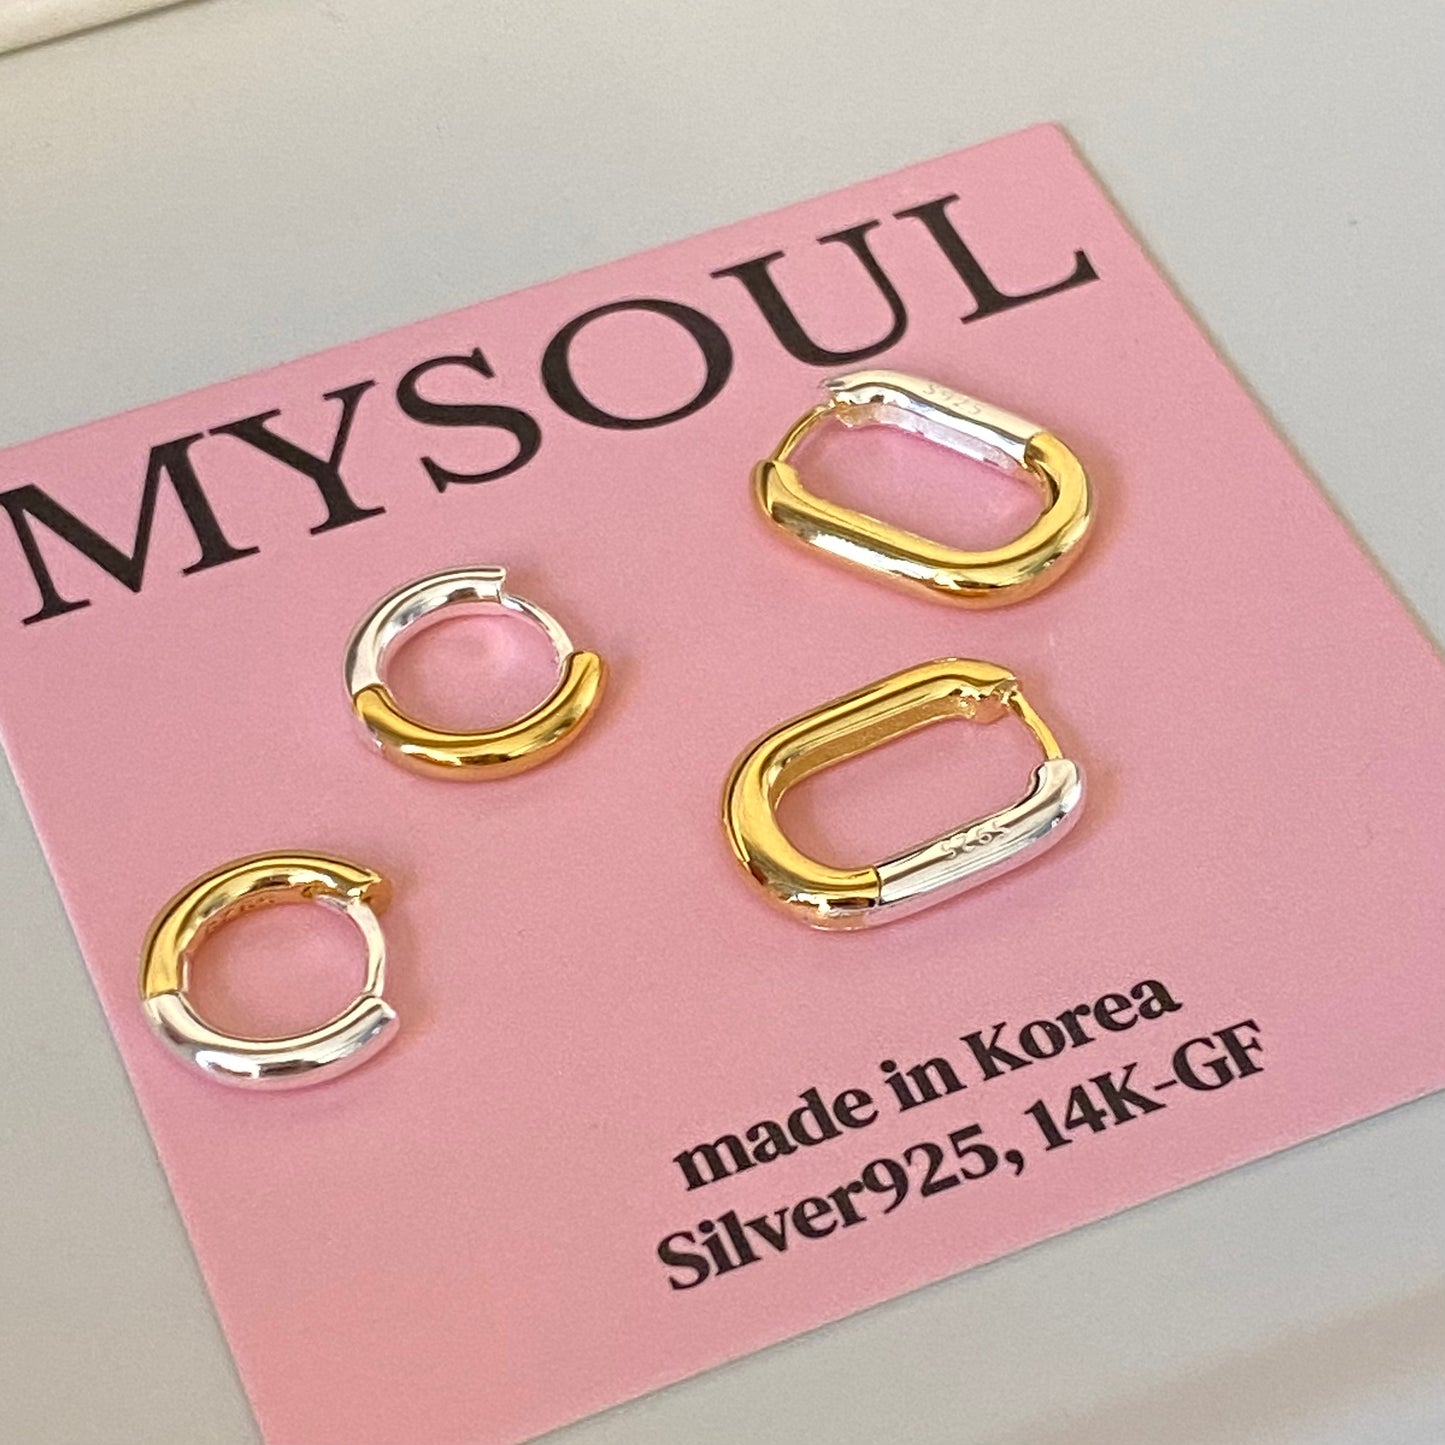 [925silver] Mix- Mini Plain One Touch Earrings